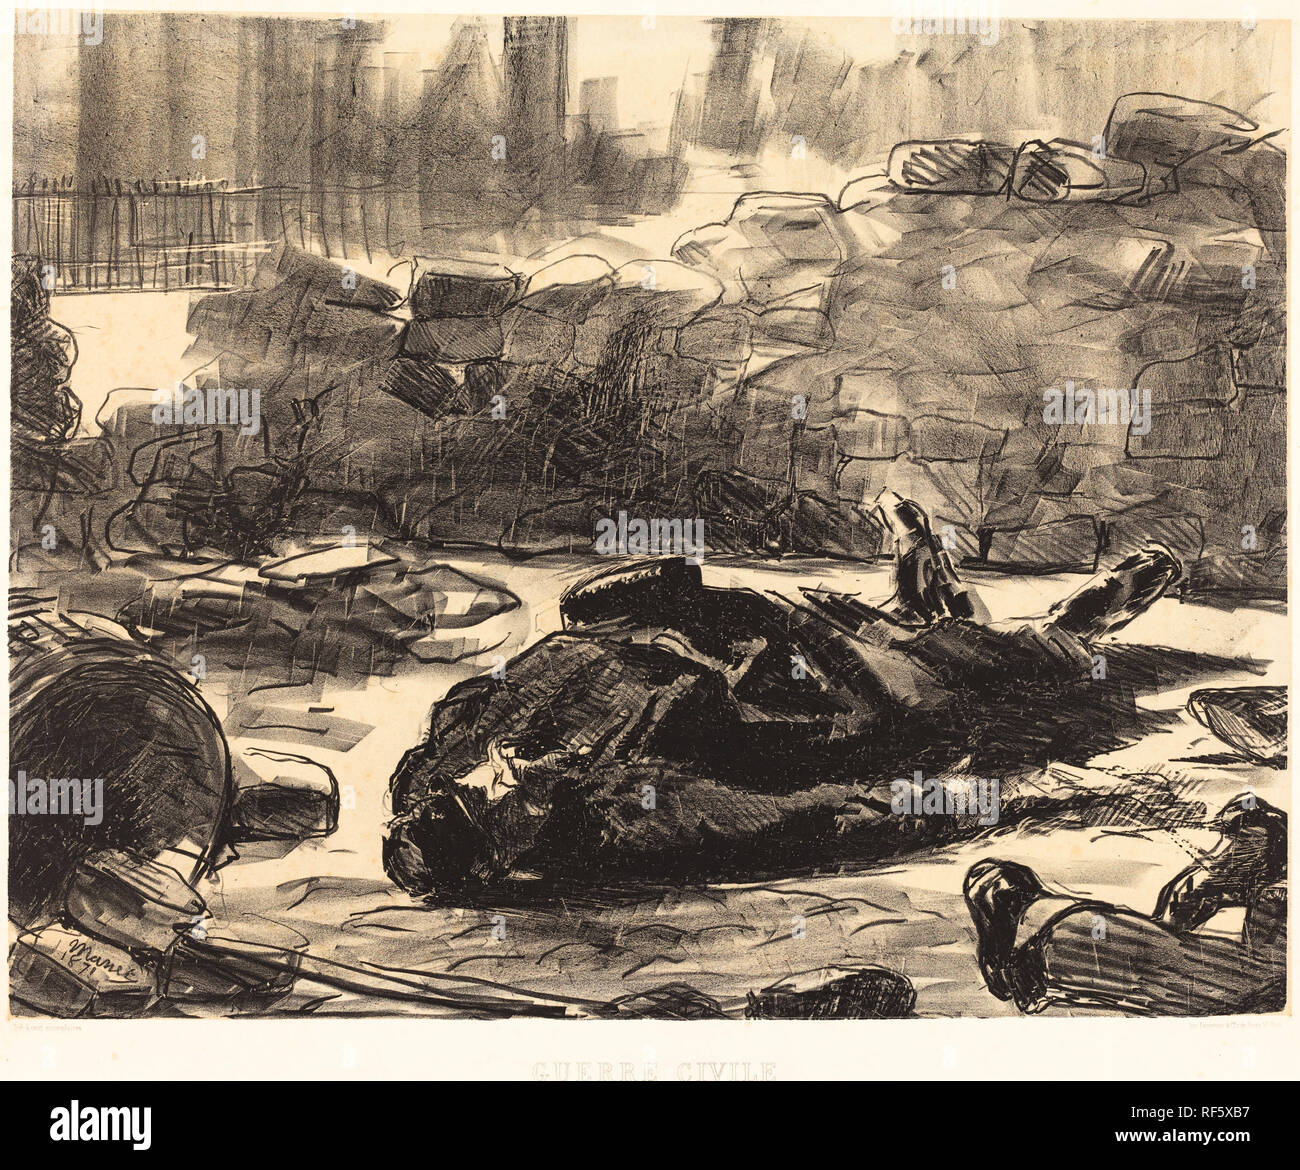 Civil War (Guerre civile). Dated: 1871. Dimensions: image: 40 x 50.7 cm (15 3/4 x 19 15/16 in.)  sheet: 47.6 x 60.4 cm (18 3/4 x 23 3/4 in.). Medium: lithograph. Museum: National Gallery of Art, Washington DC. Author: EDOUARD MANET. Stock Photo